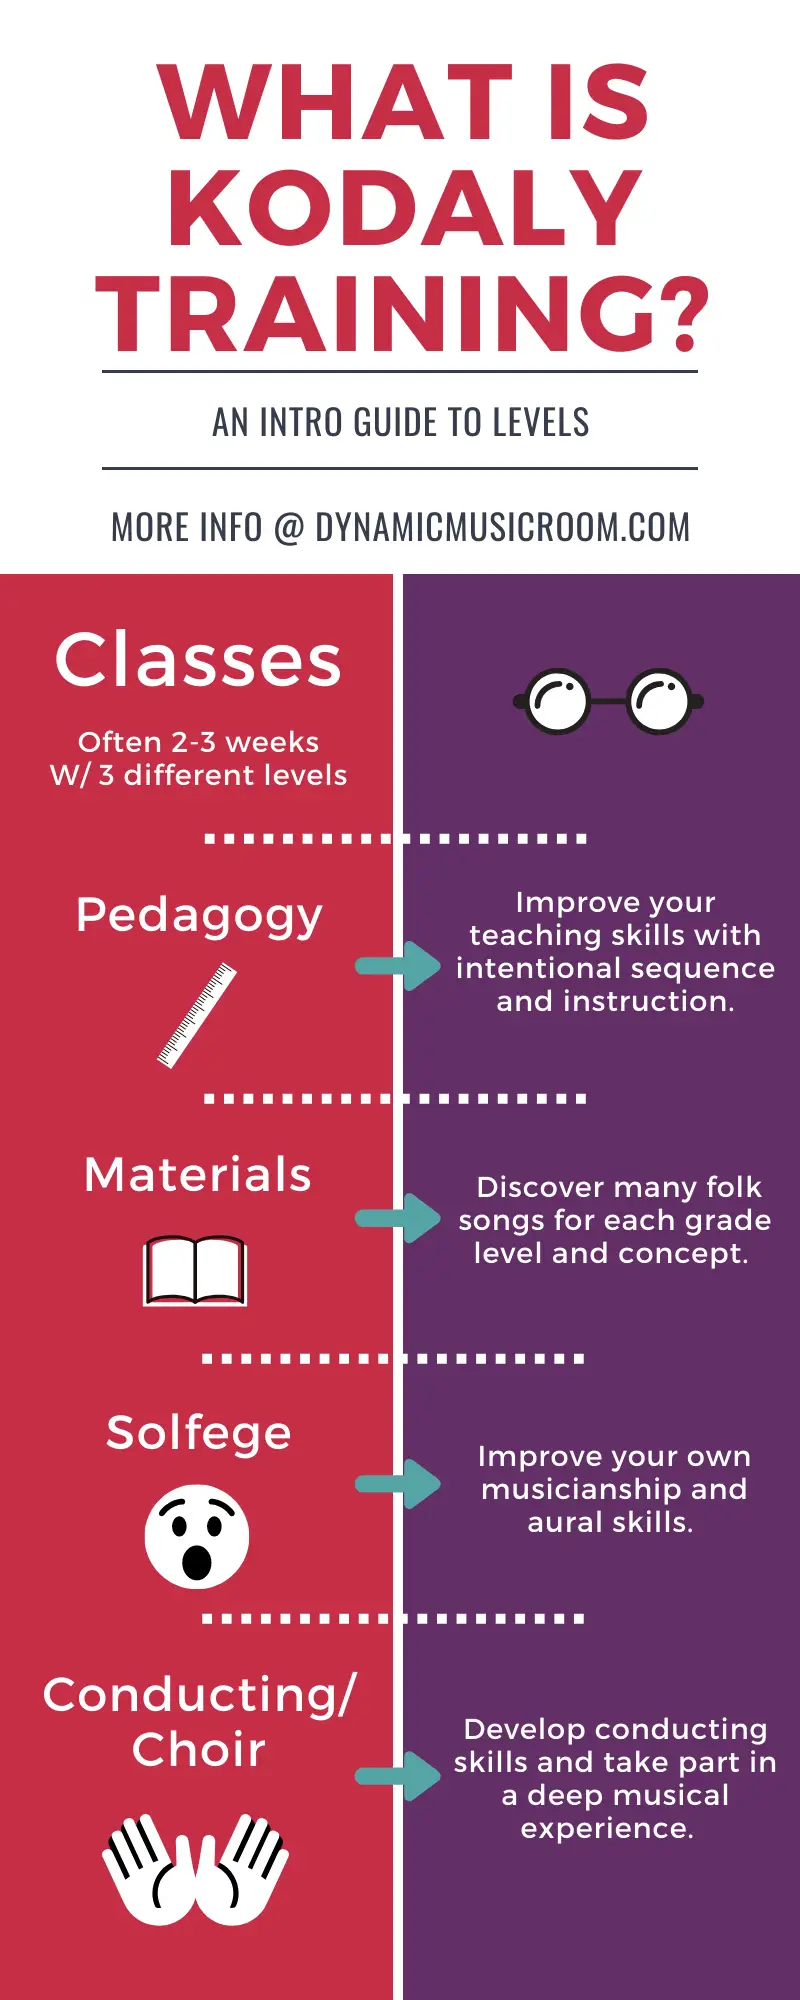 image what is kodaly training infographic 